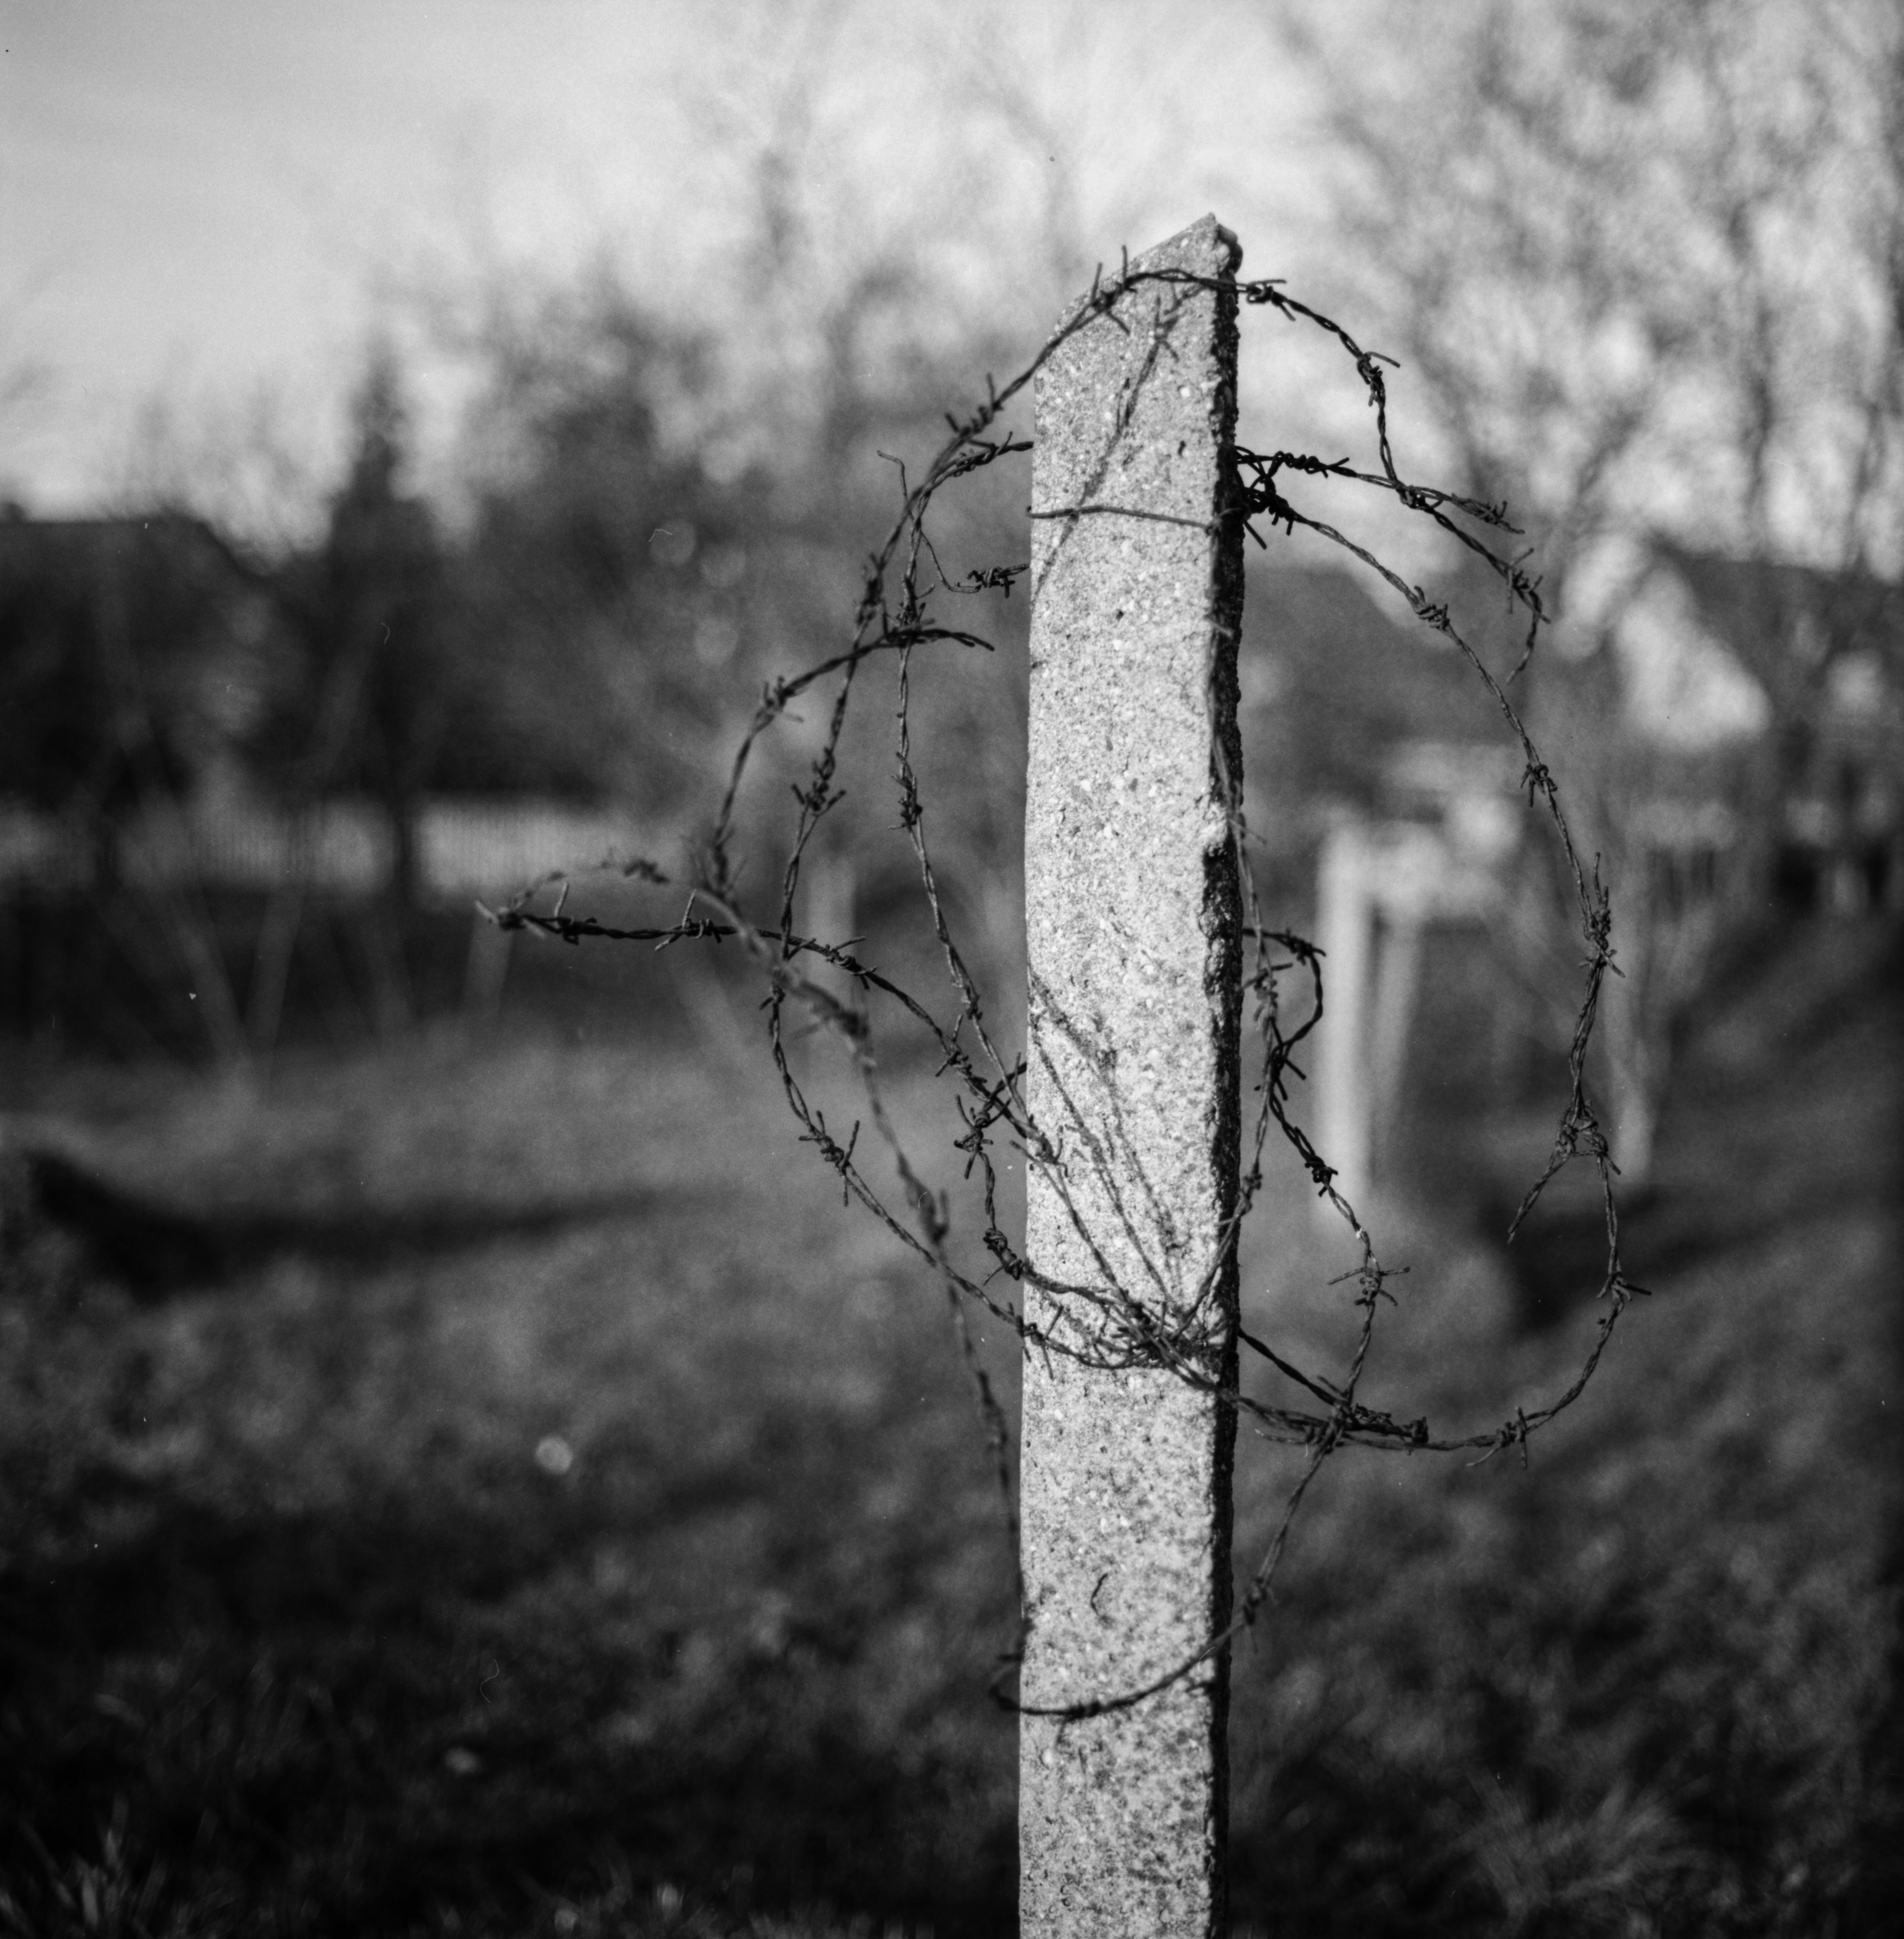 greyscale photo of barb wire